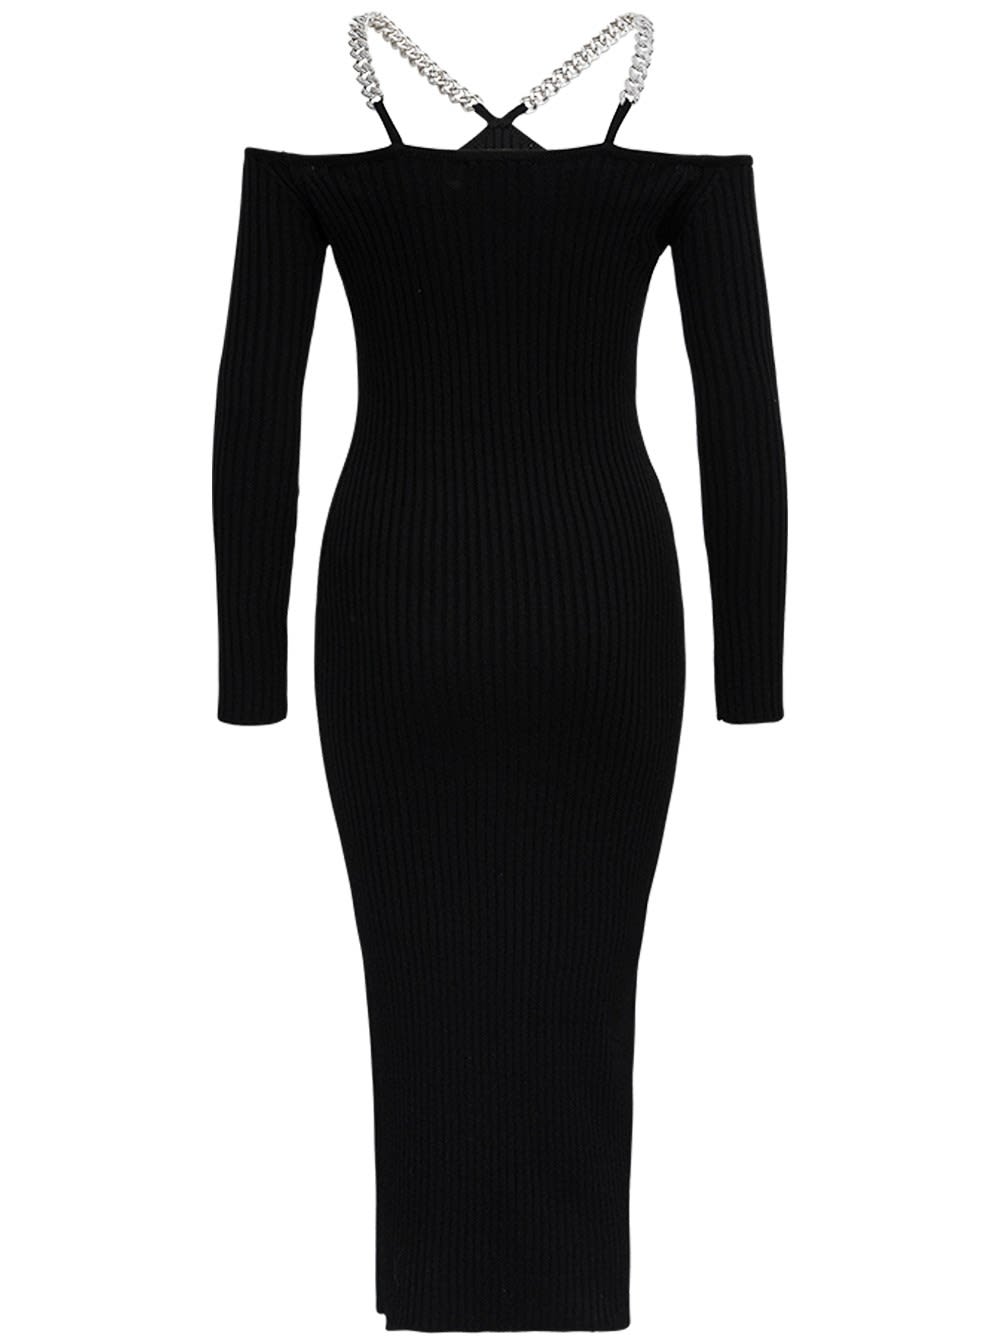 Giuseppe di Morabito Ribbed Knit Dress With Chain Shoulder Straps